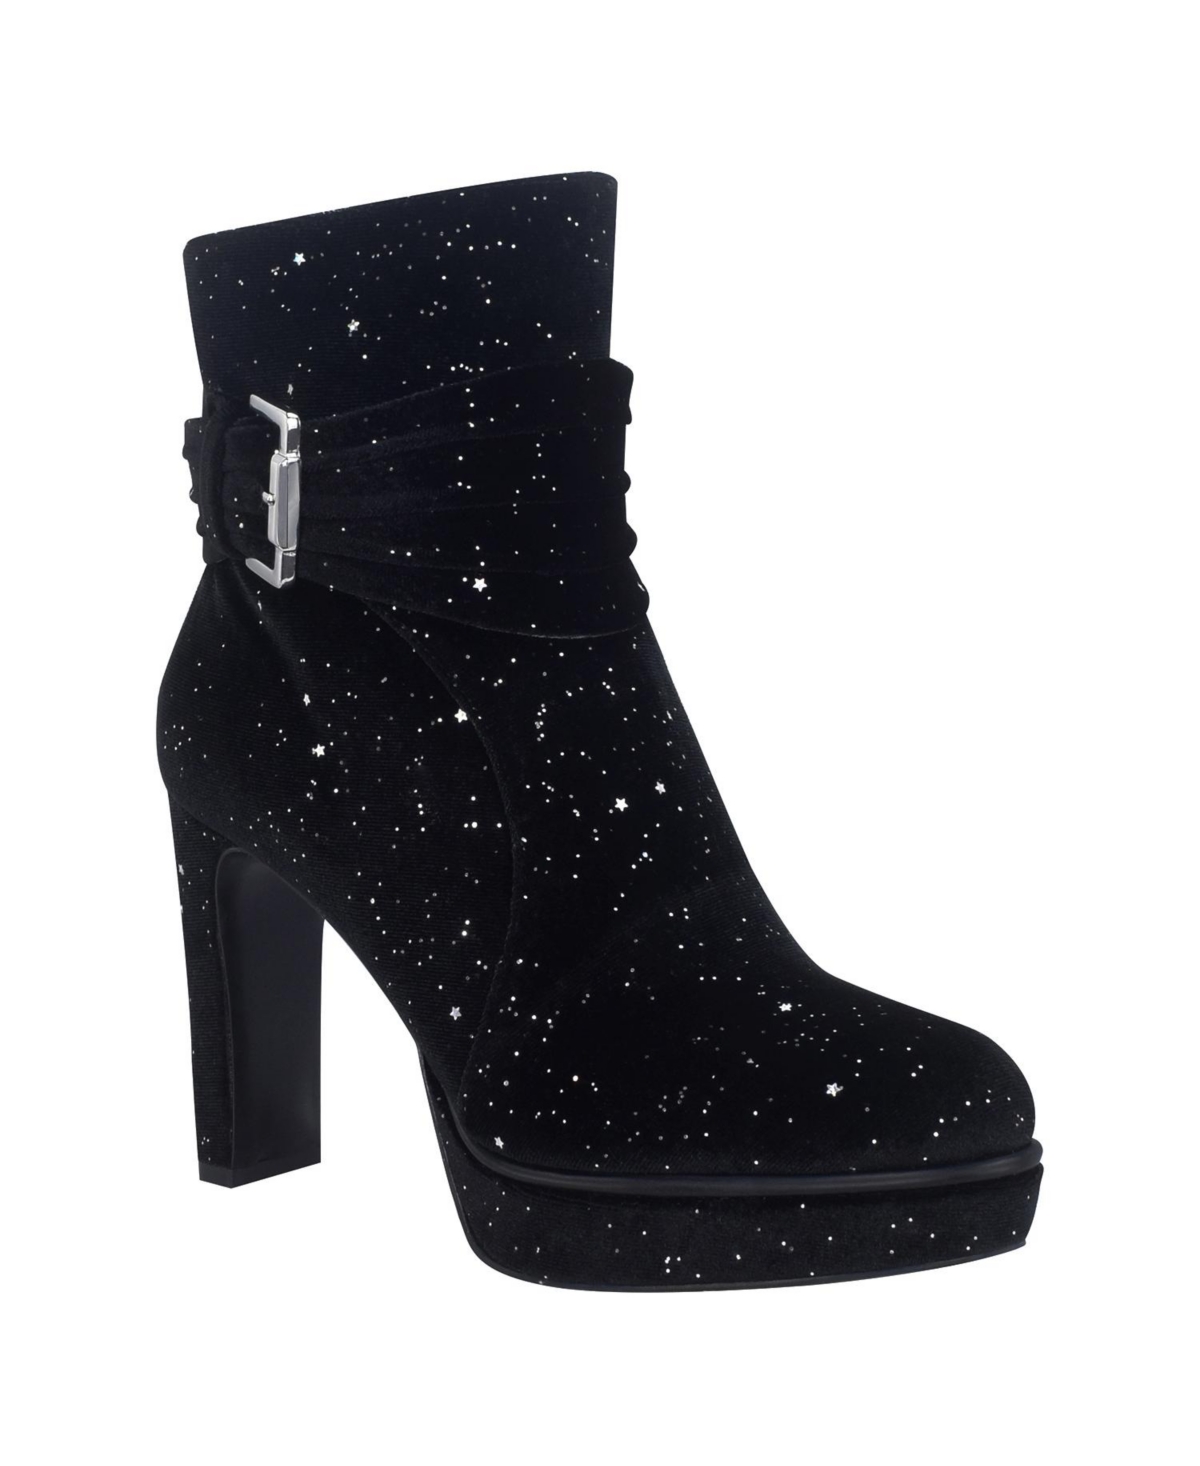 Women's Omira Bling Platform Ankle Boots with Memory Foam - Black